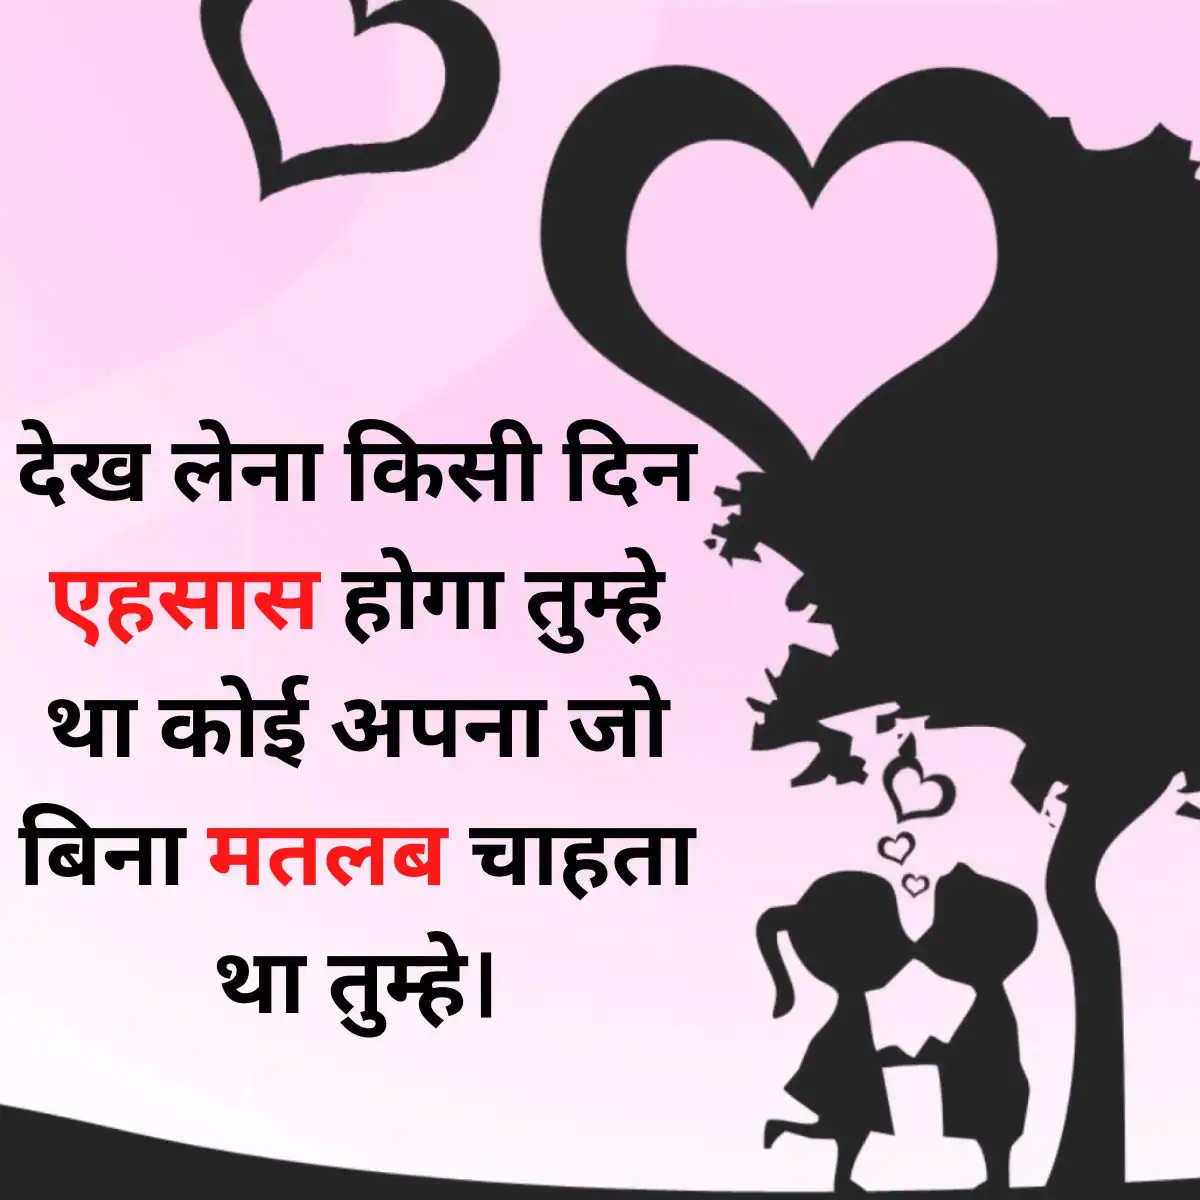 घमंड पर अनमोल वचन - Ghamand Quotes in Hindi